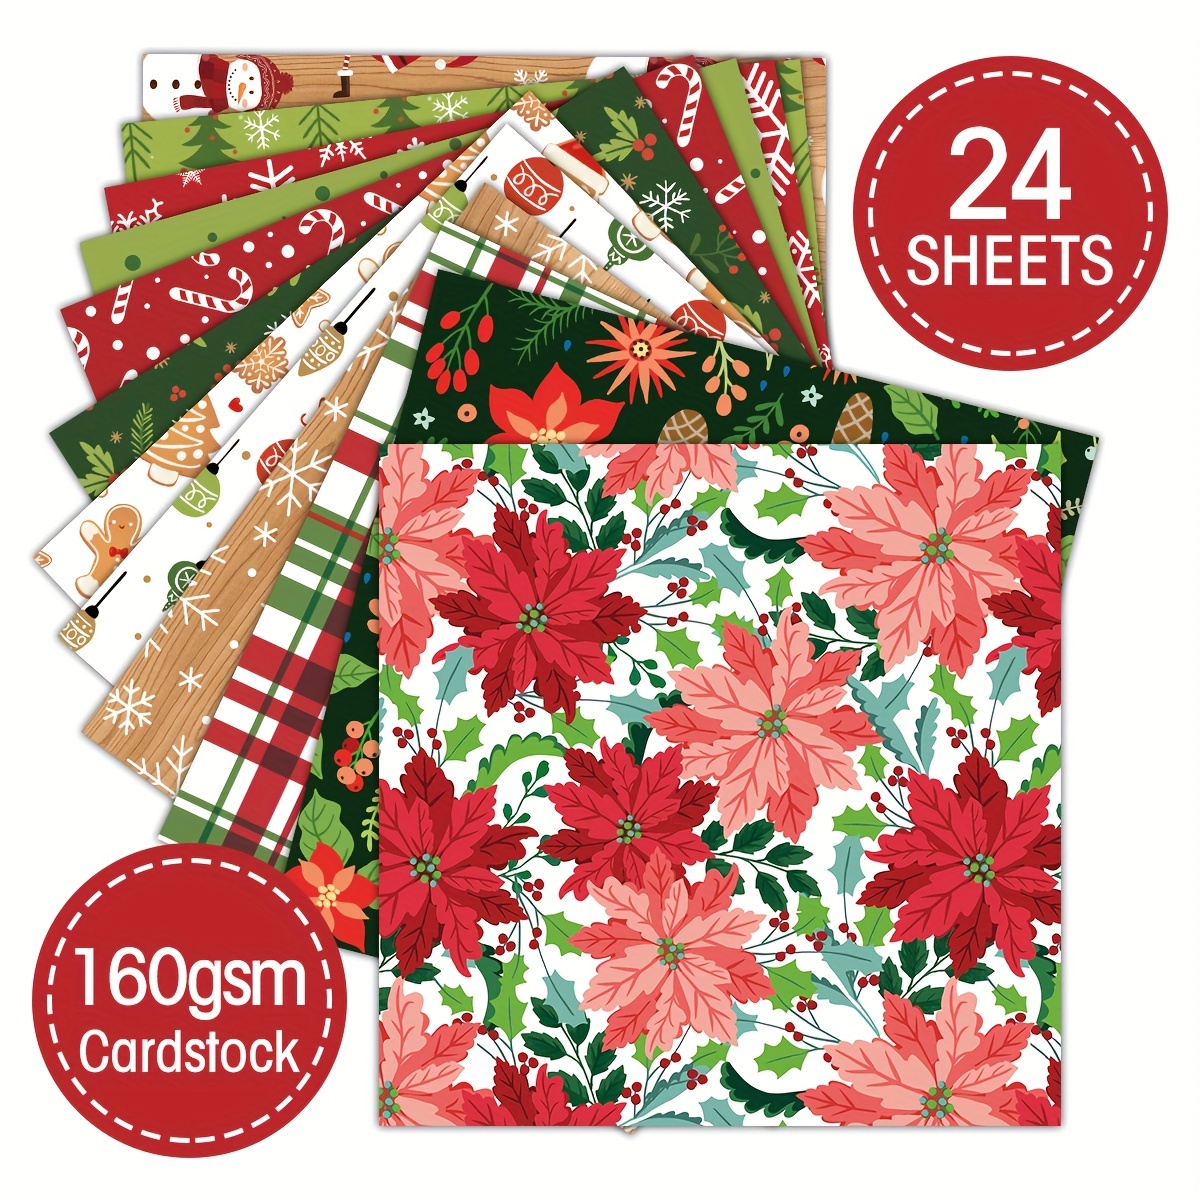  ZAKHSE Christmas Cardstock Paper,A5 Sized Scrapbook Paper  Pad,32 Sheets Single-Sided Wreath Pine Cone Pattern Paper,Decorative Craft  Paper Photo Album Background DIY Card Making Scrapbooking Supplies : Arts,  Crafts & Sewing